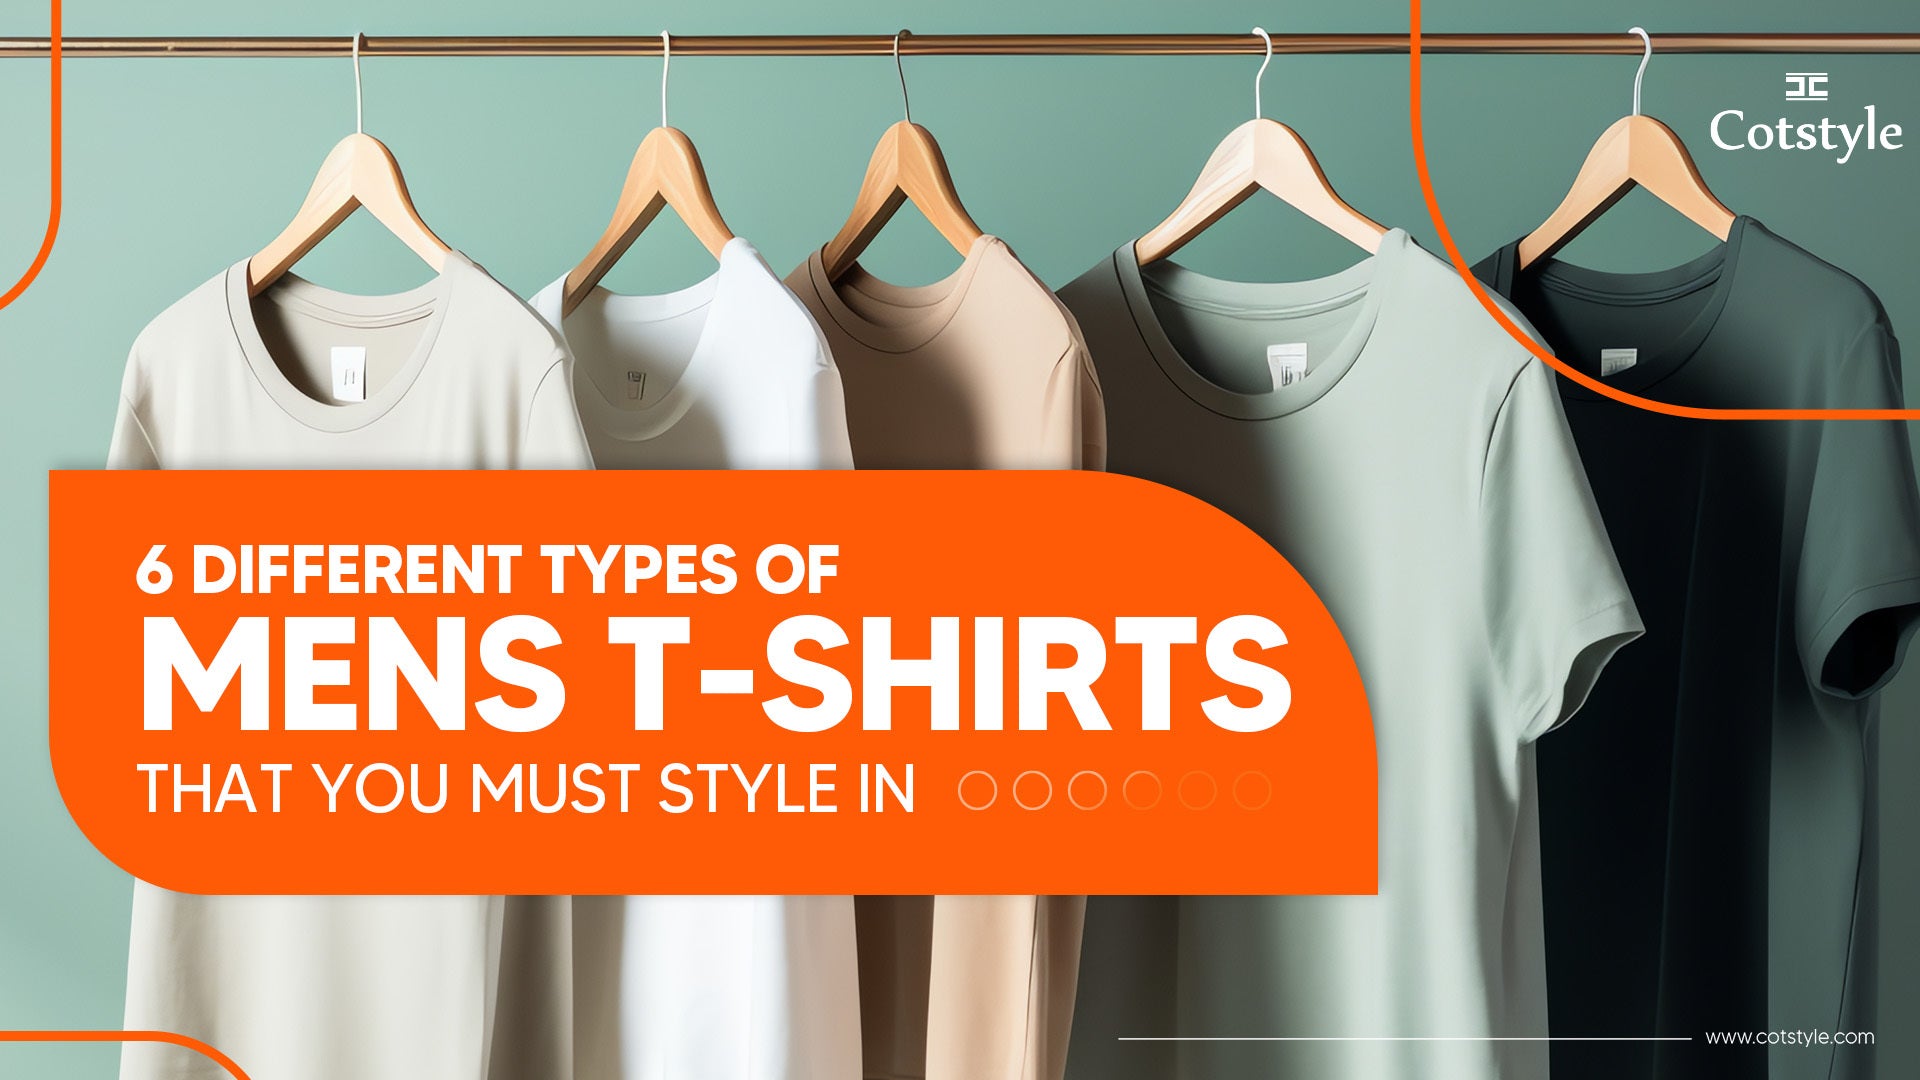 6 Different Types Of Men's T-Shirts That You Must Style In